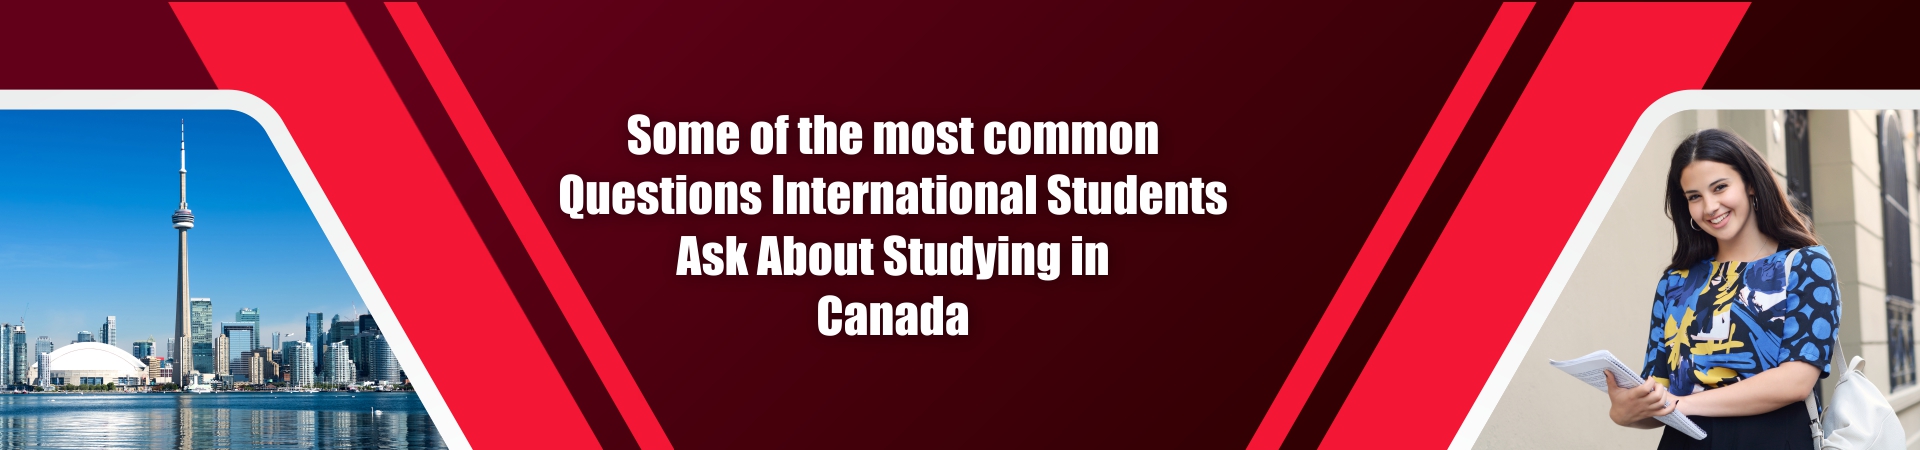 Some of the most common Questions International Students Ask About Studying in Canada